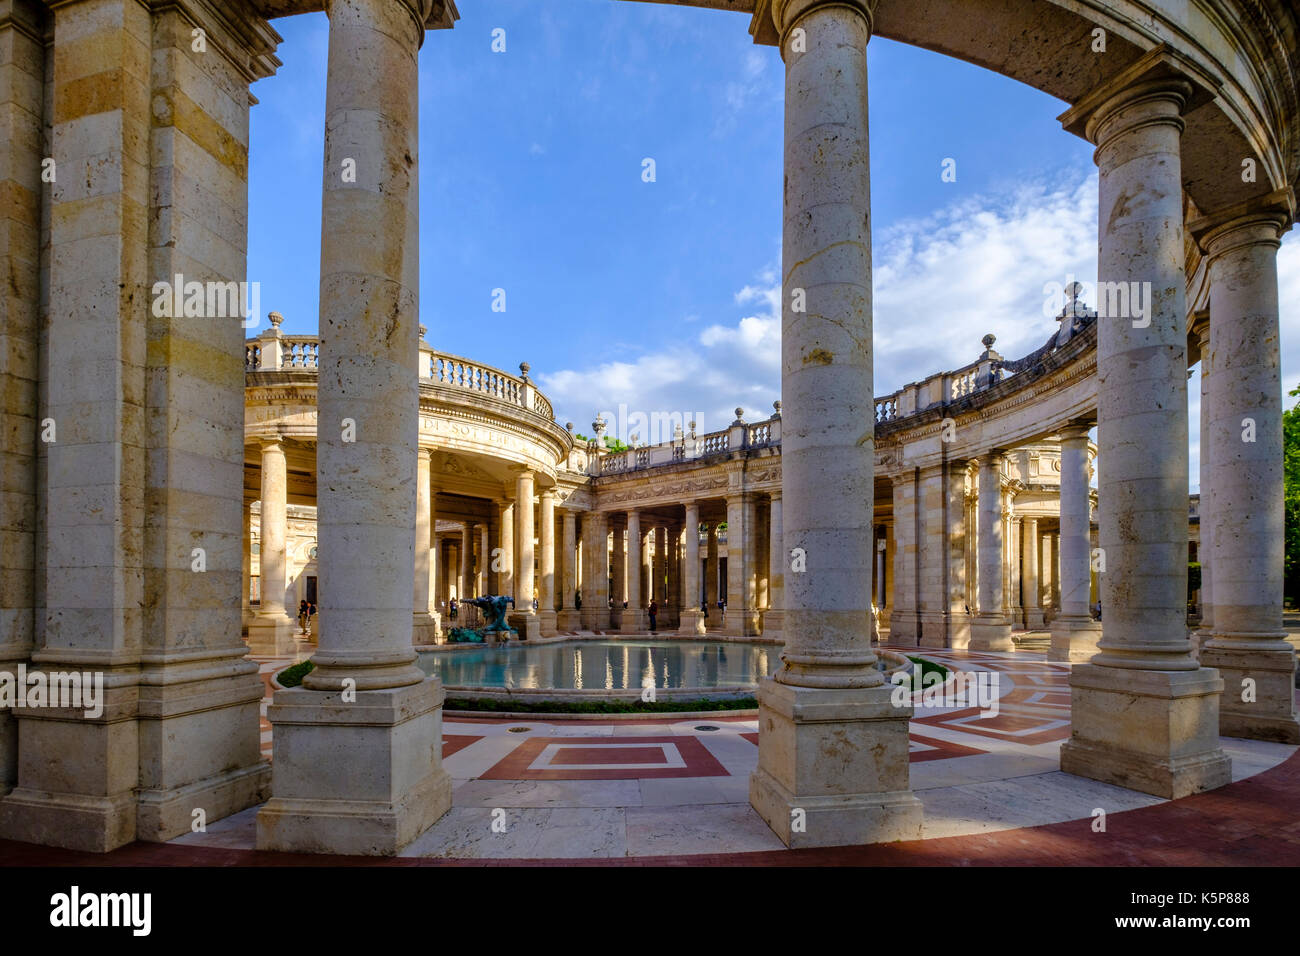 The hot springs of Tettuccio Terme are located between splendid old buildings in a wonderful park Stock Photo